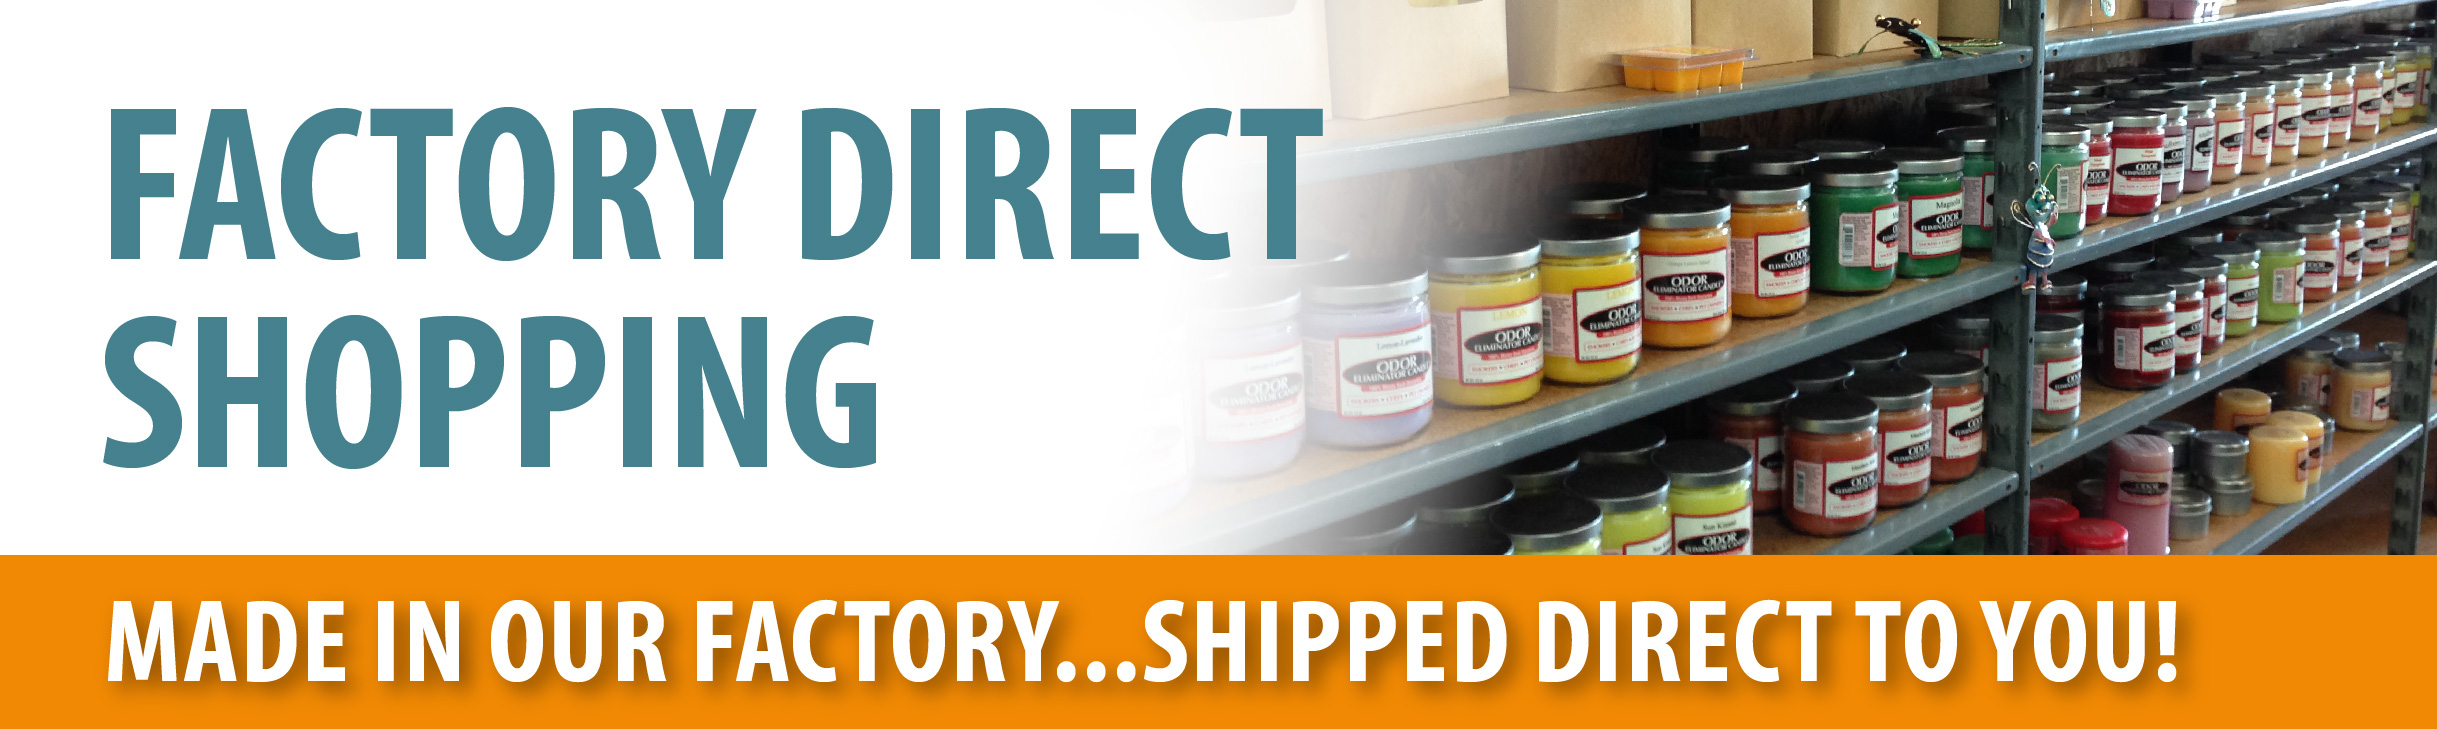 Factory Direct Shopping